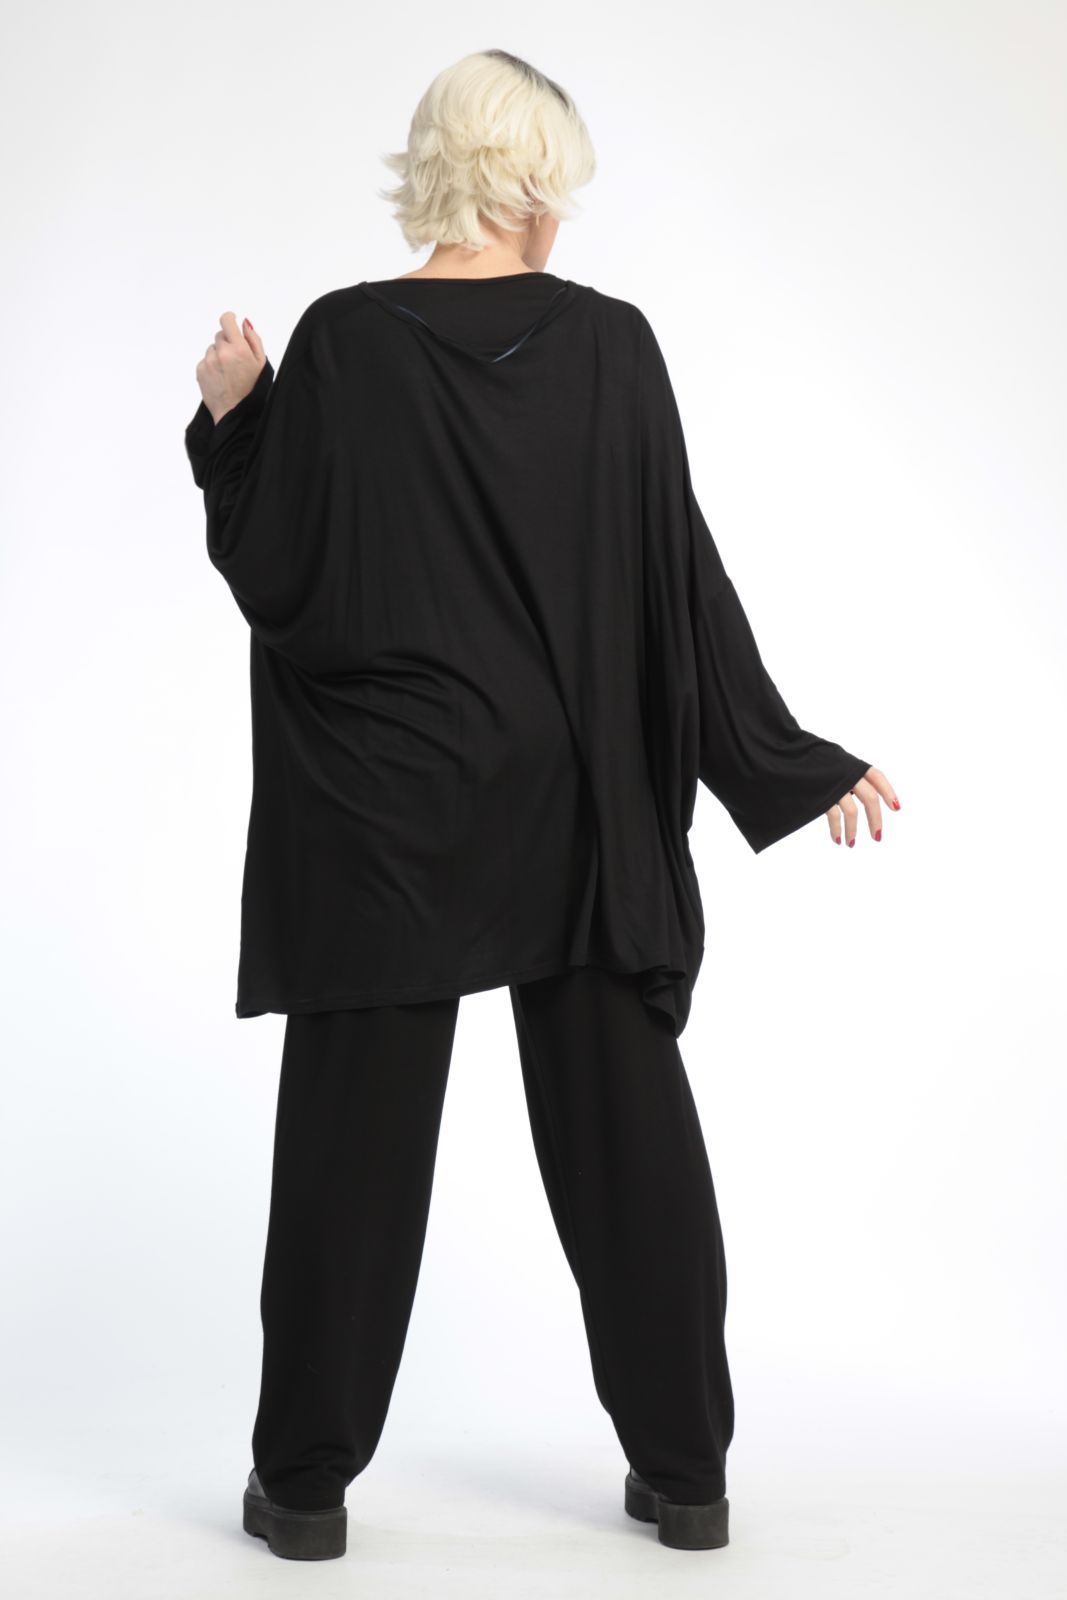 Everyday big shirt in a boxy shape made of soft jersey quality, viscose basics in black